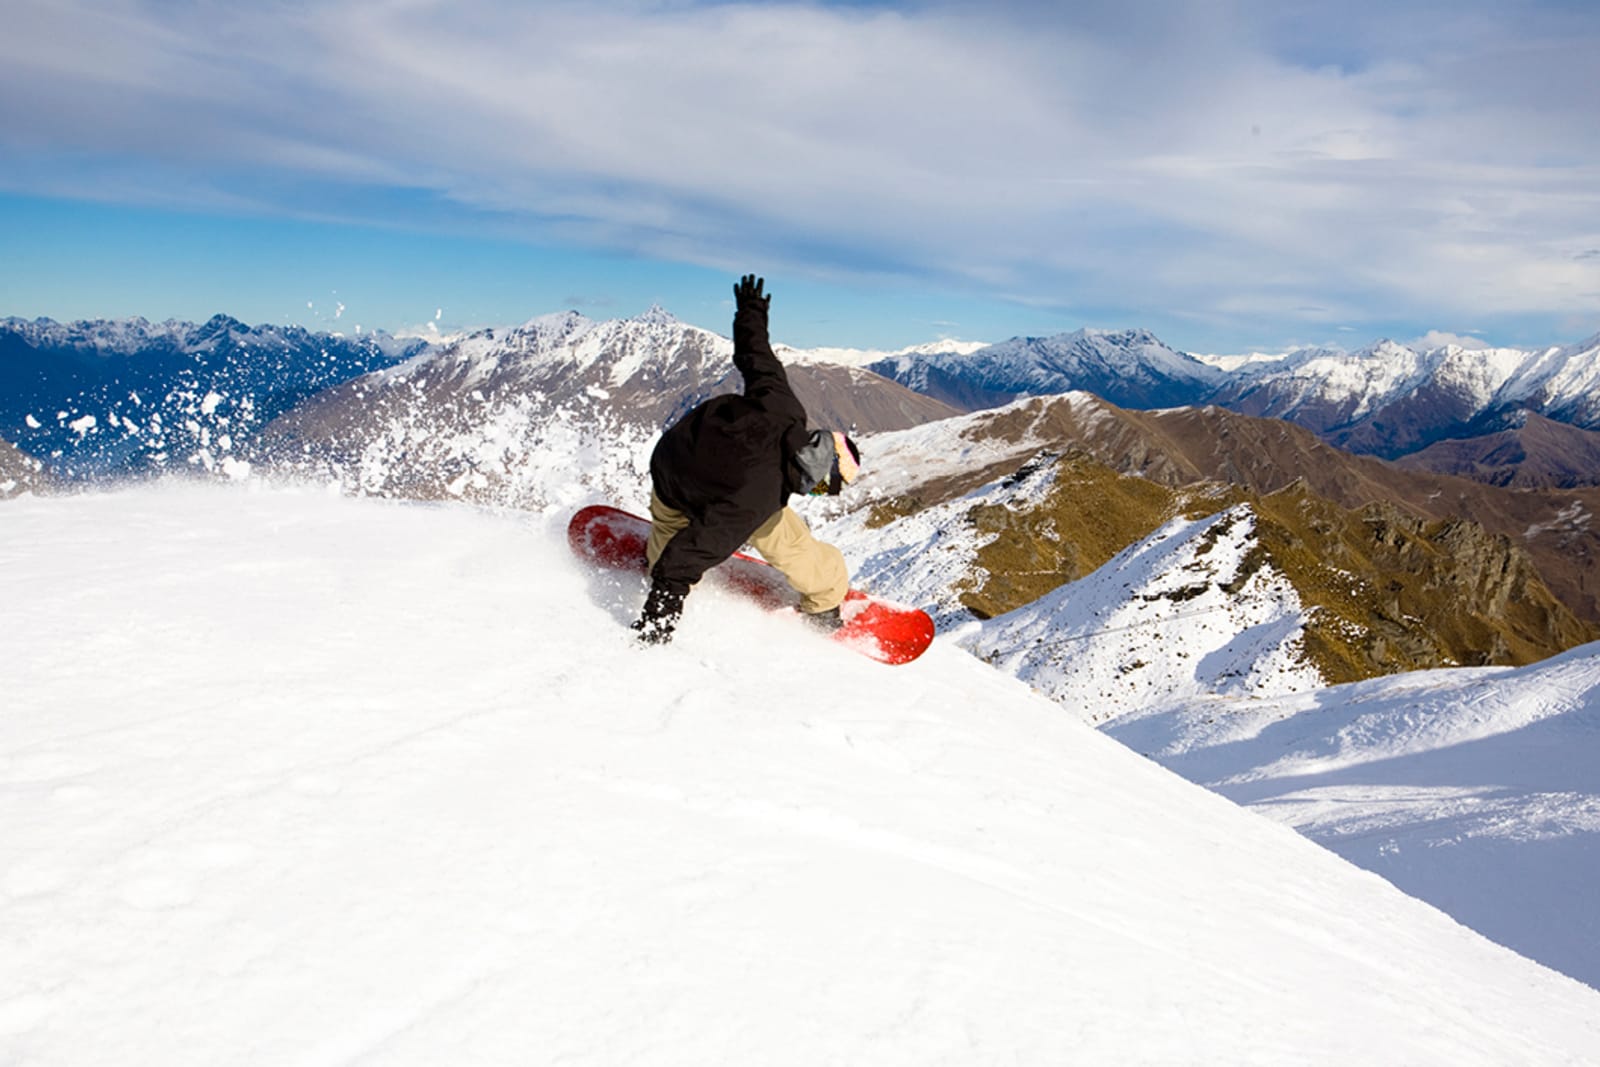 Coronet Peak and The Remarkables ski area are two of Queenstown's biggest attractions